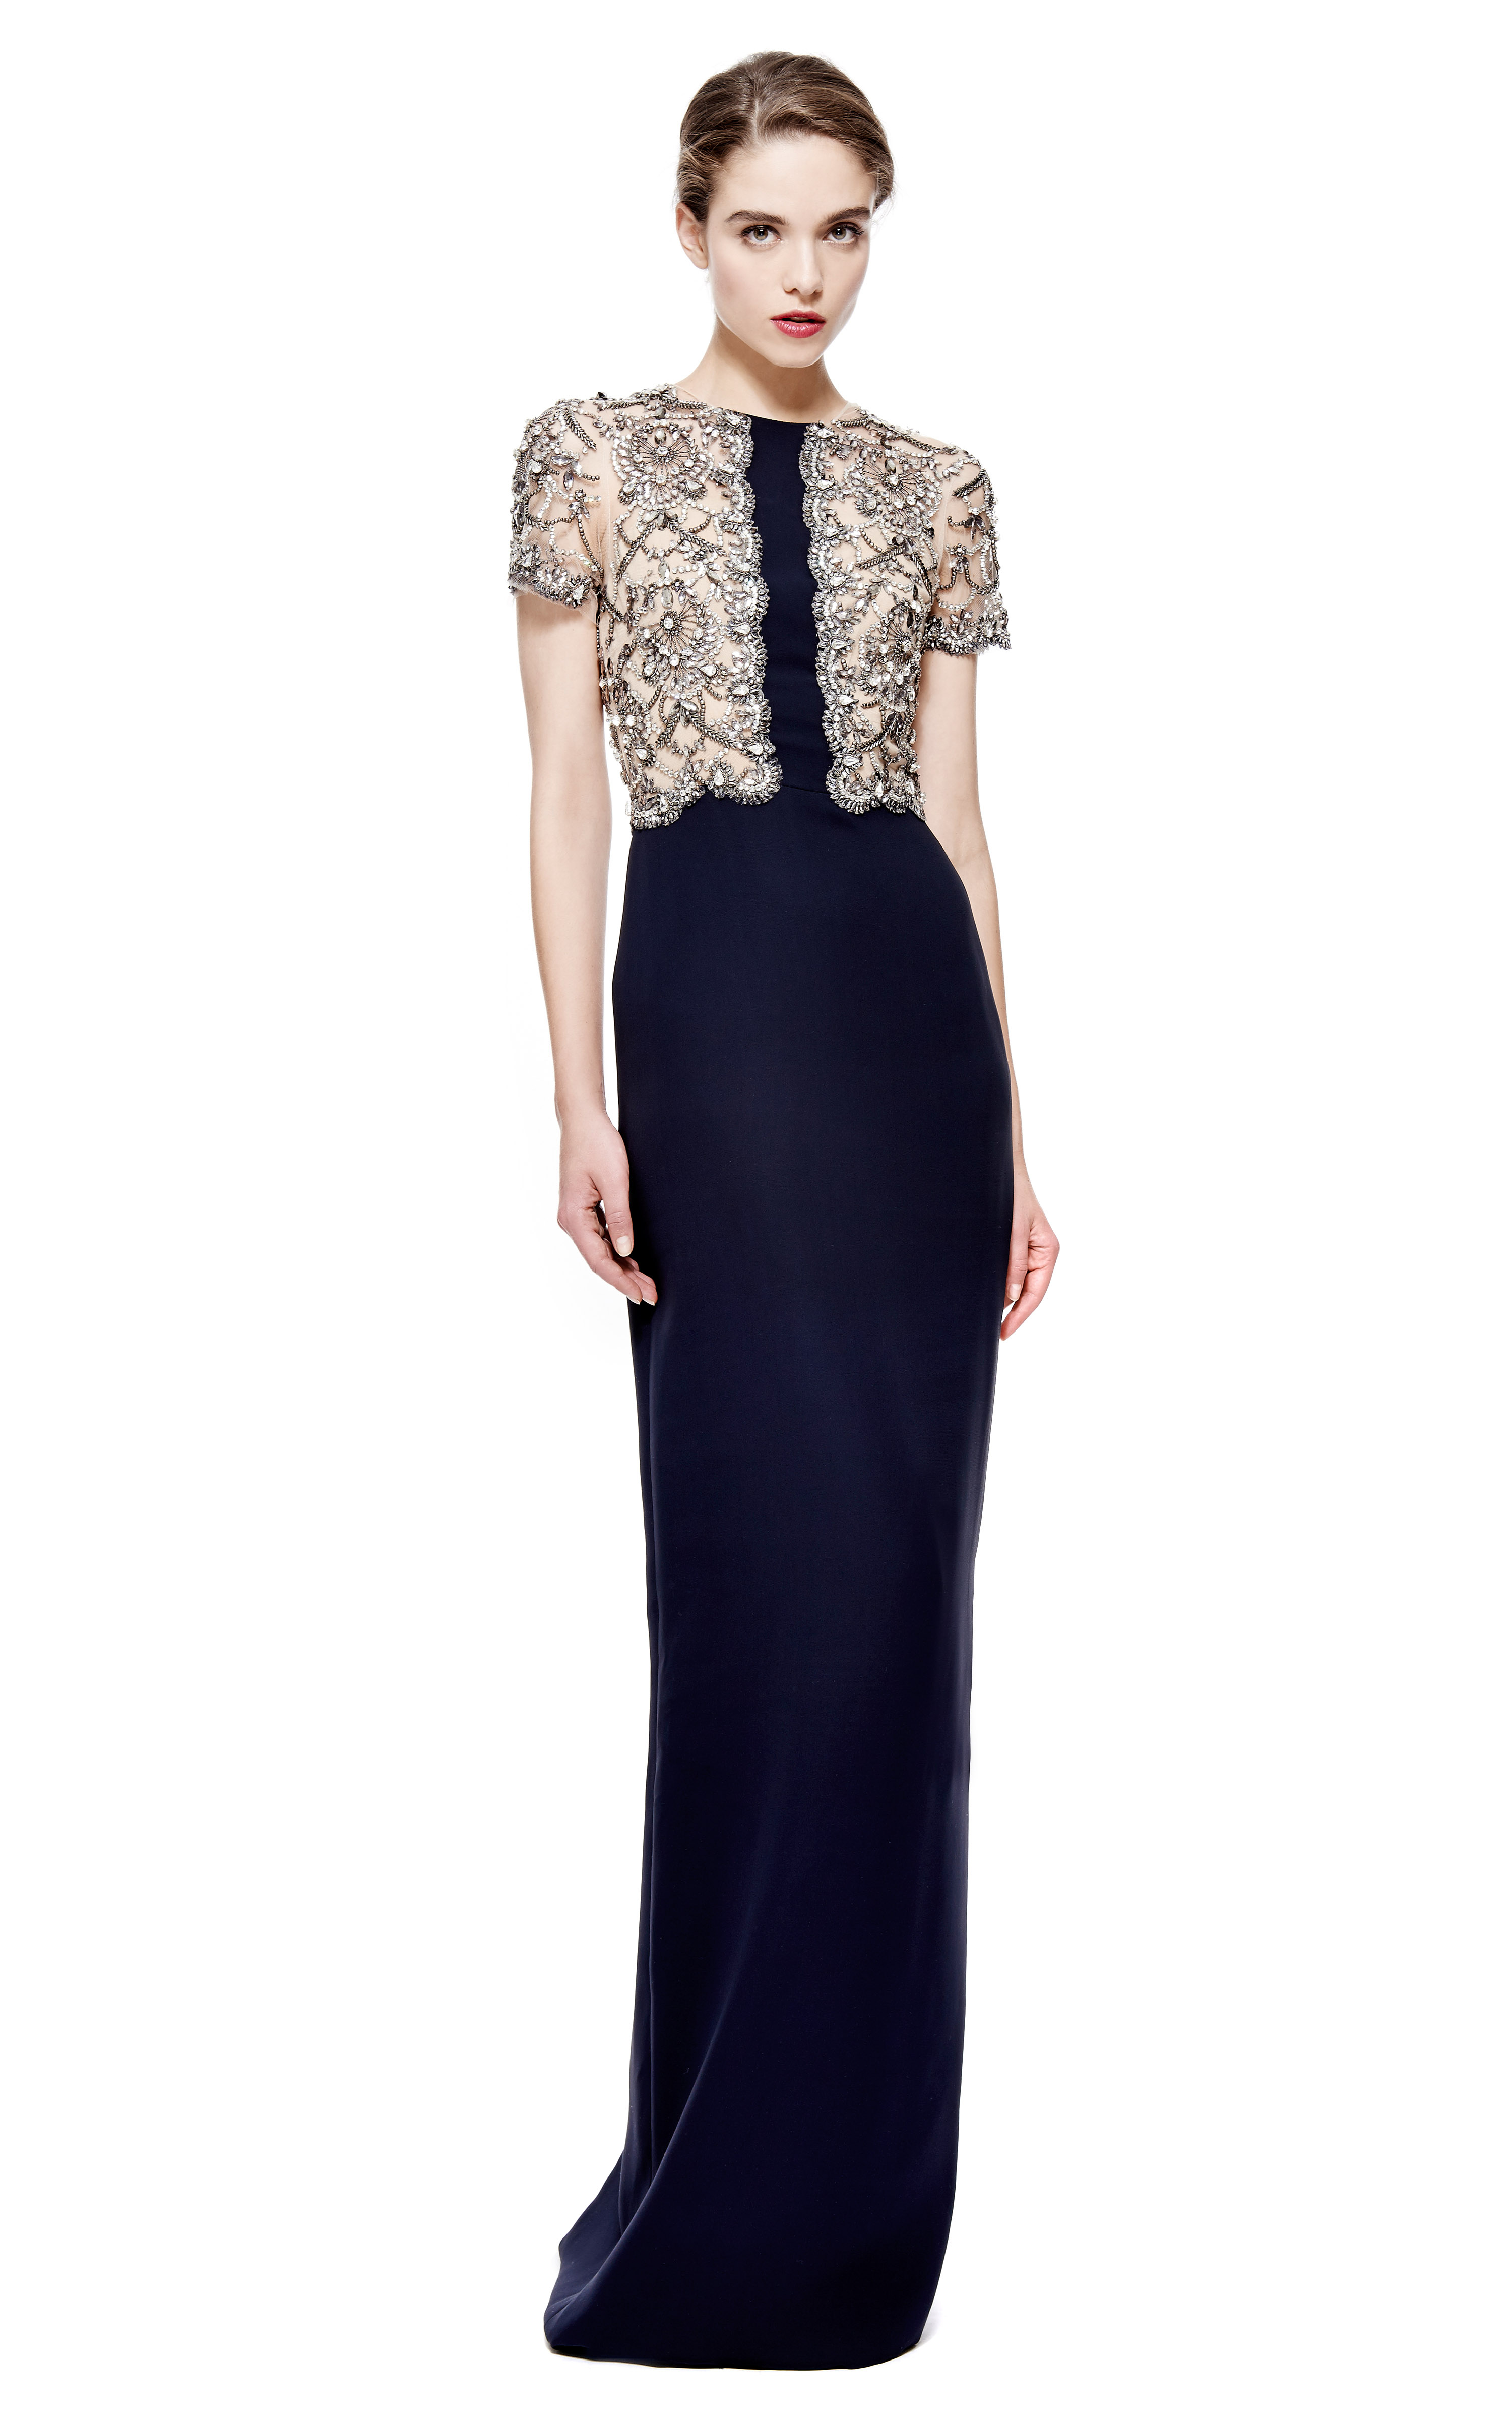 Lyst - Reem Acra Embroidered Illusion Bodice Crepe Column Gown in Blue